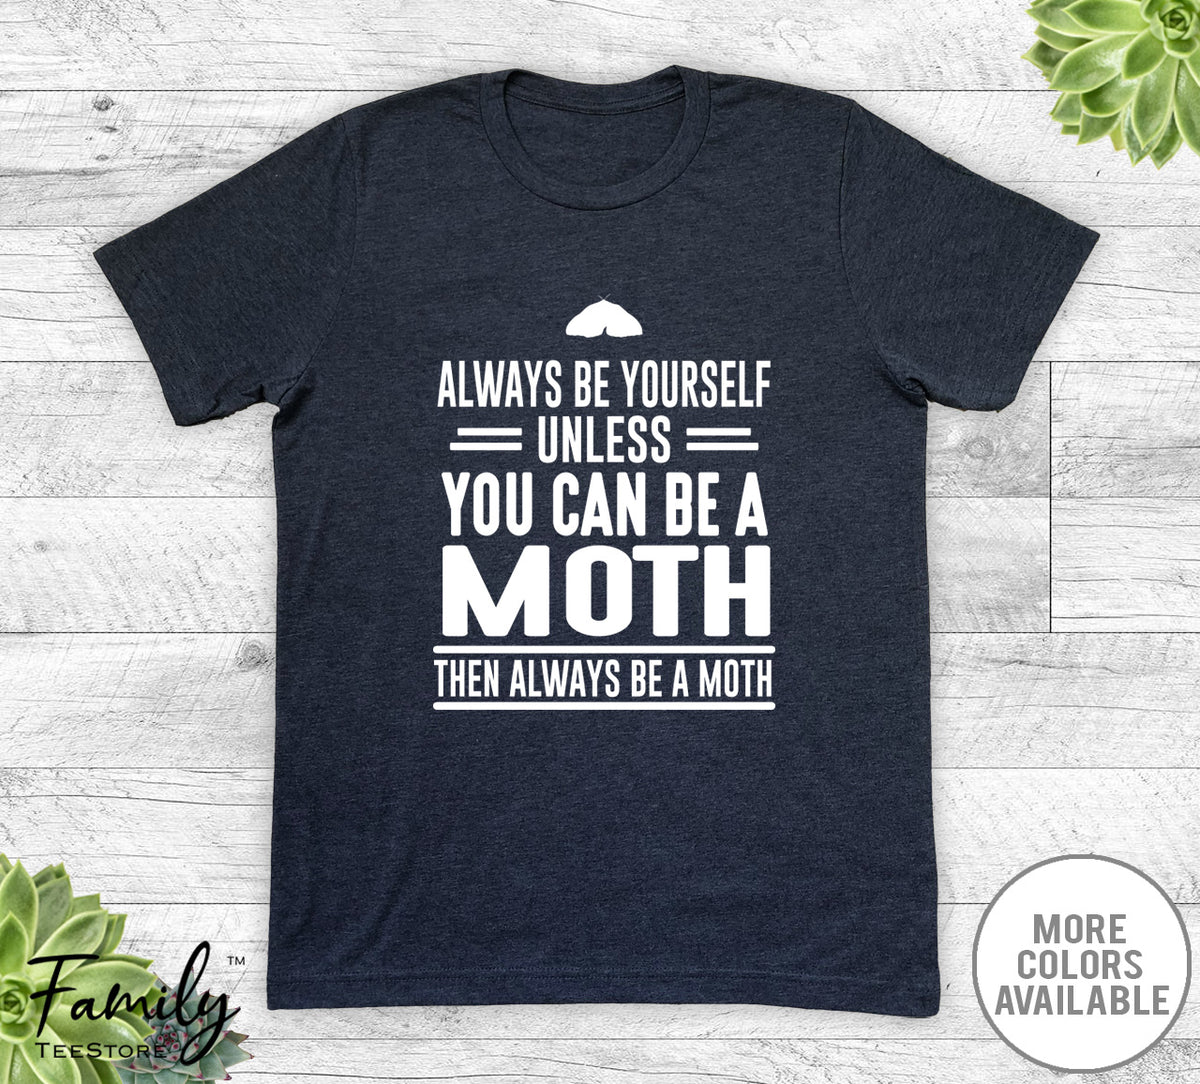 Always Be Yourself Unless You Can Be A Moth - Unisex T-shirt - Moth Shirt - Moth Gift - familyteeprints